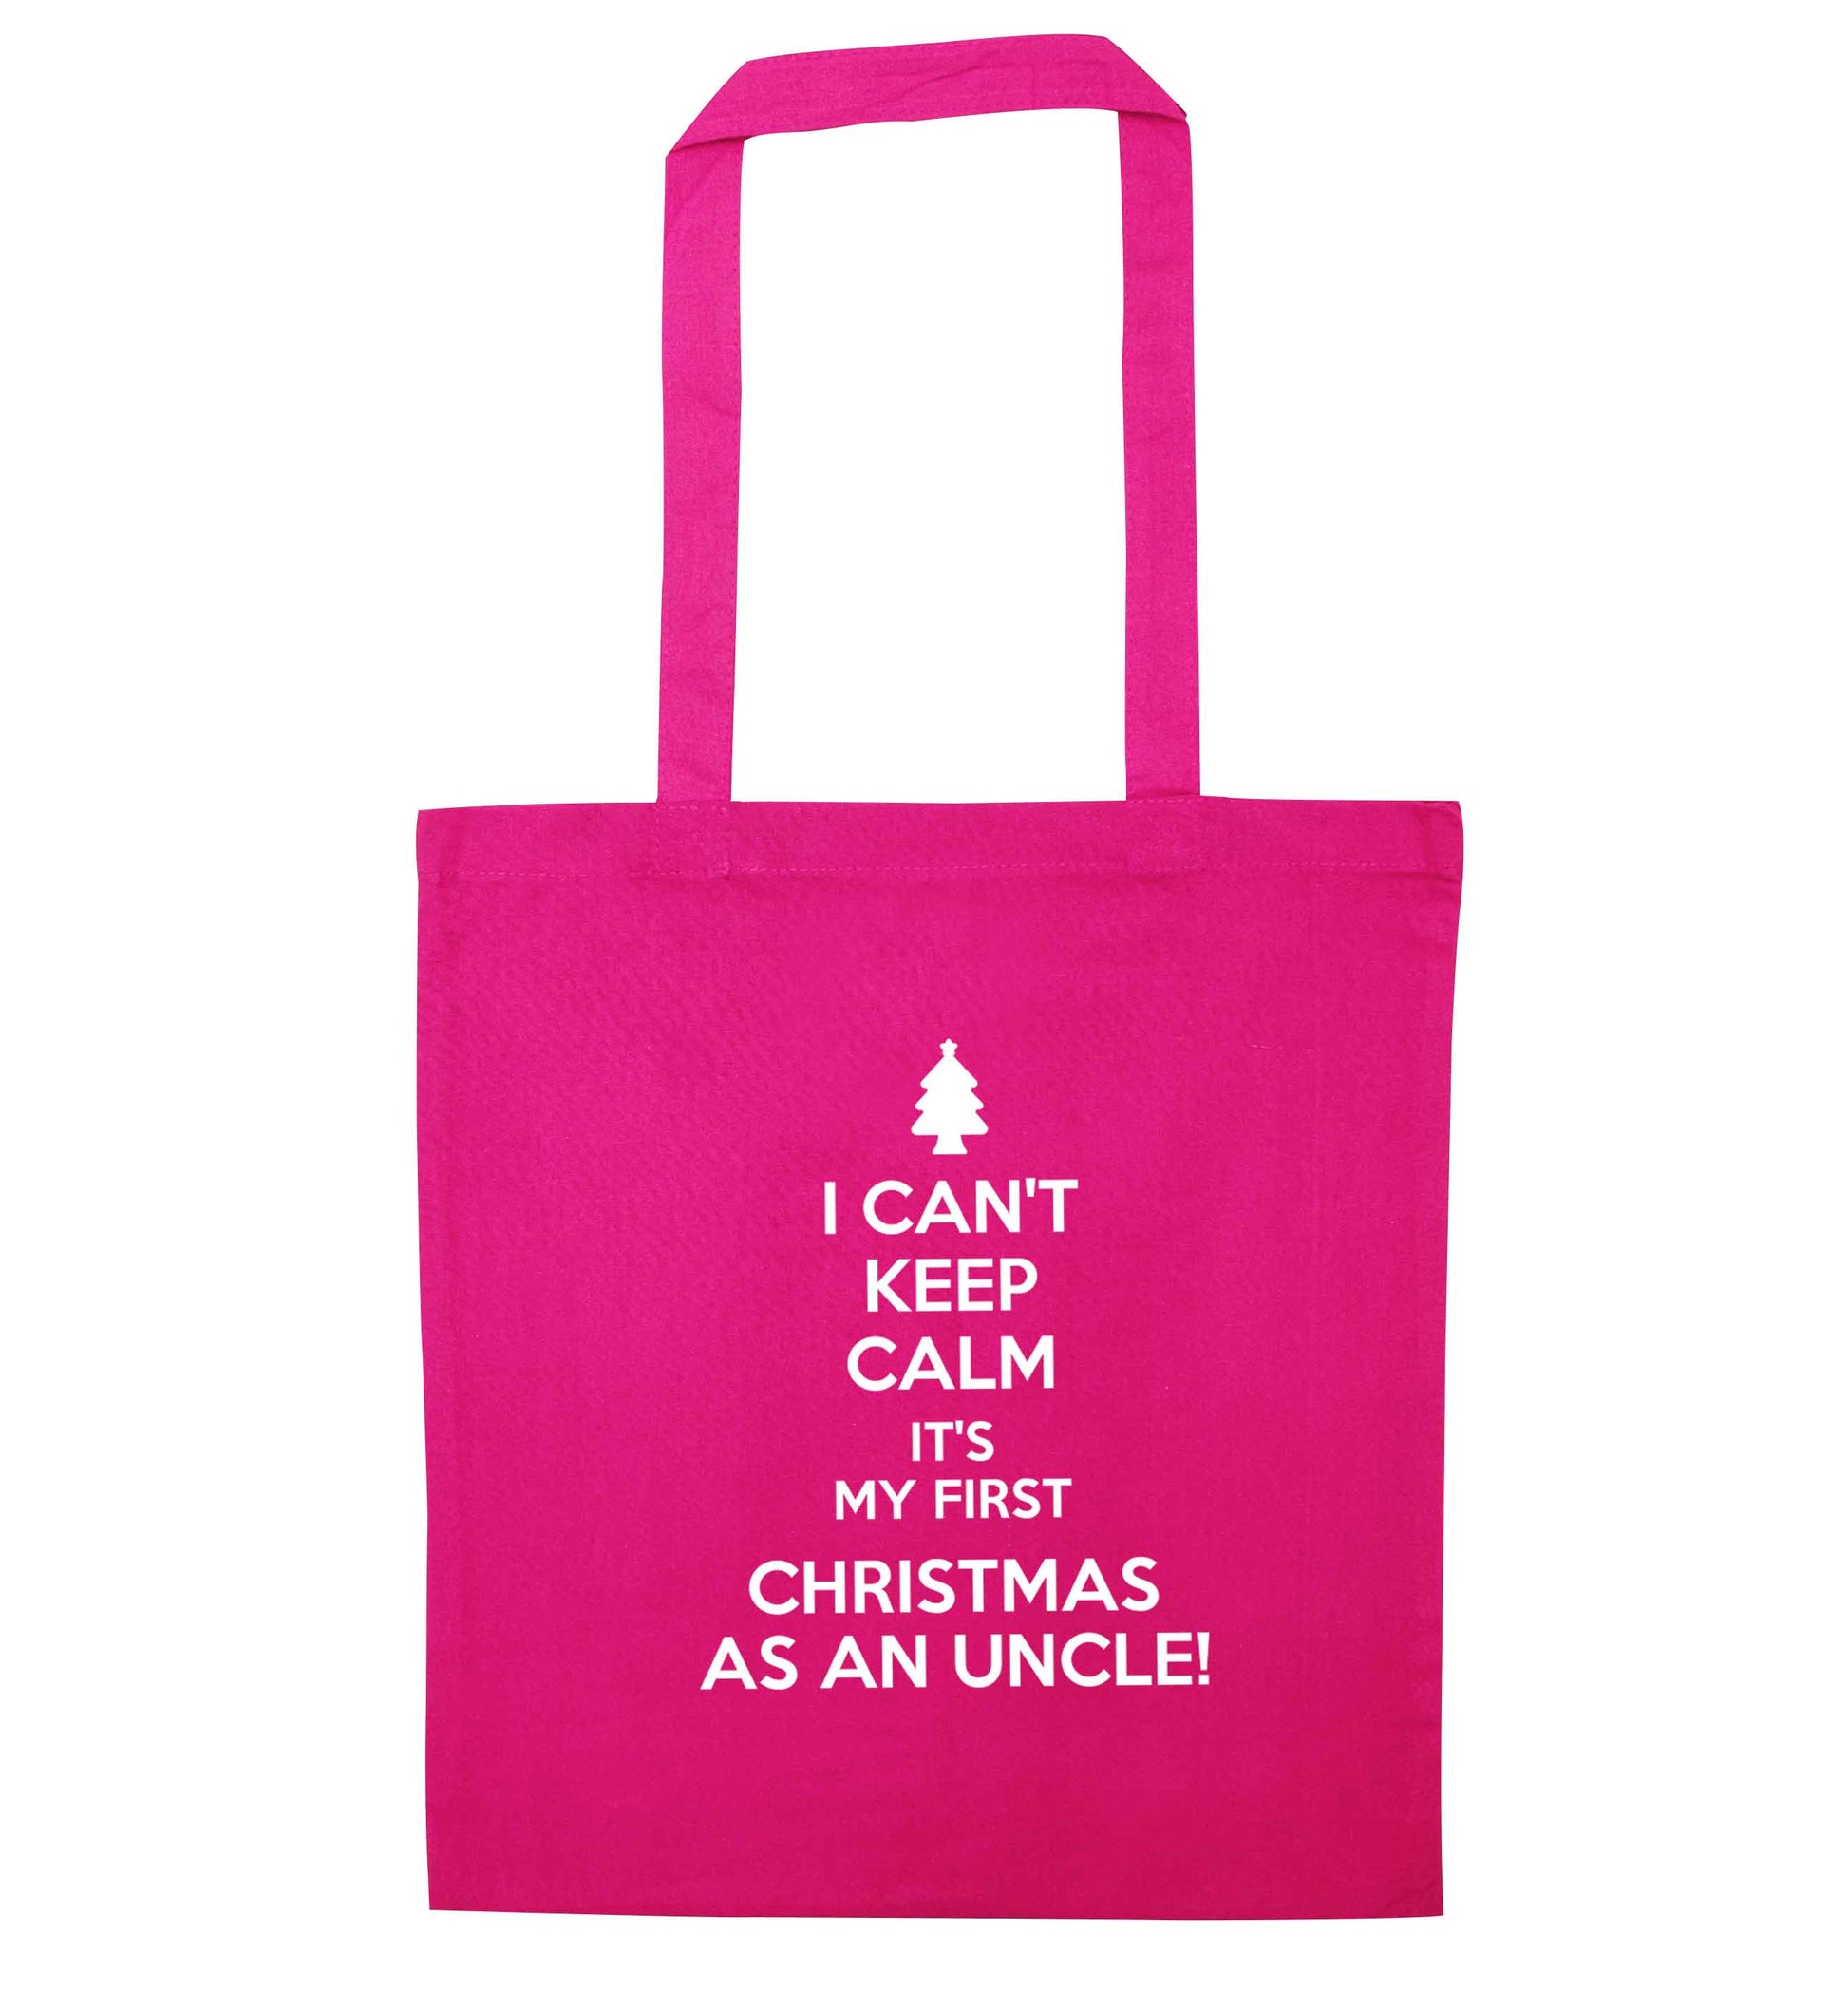 I can't keep calm it's my first Christmas as an uncle! pink tote bag